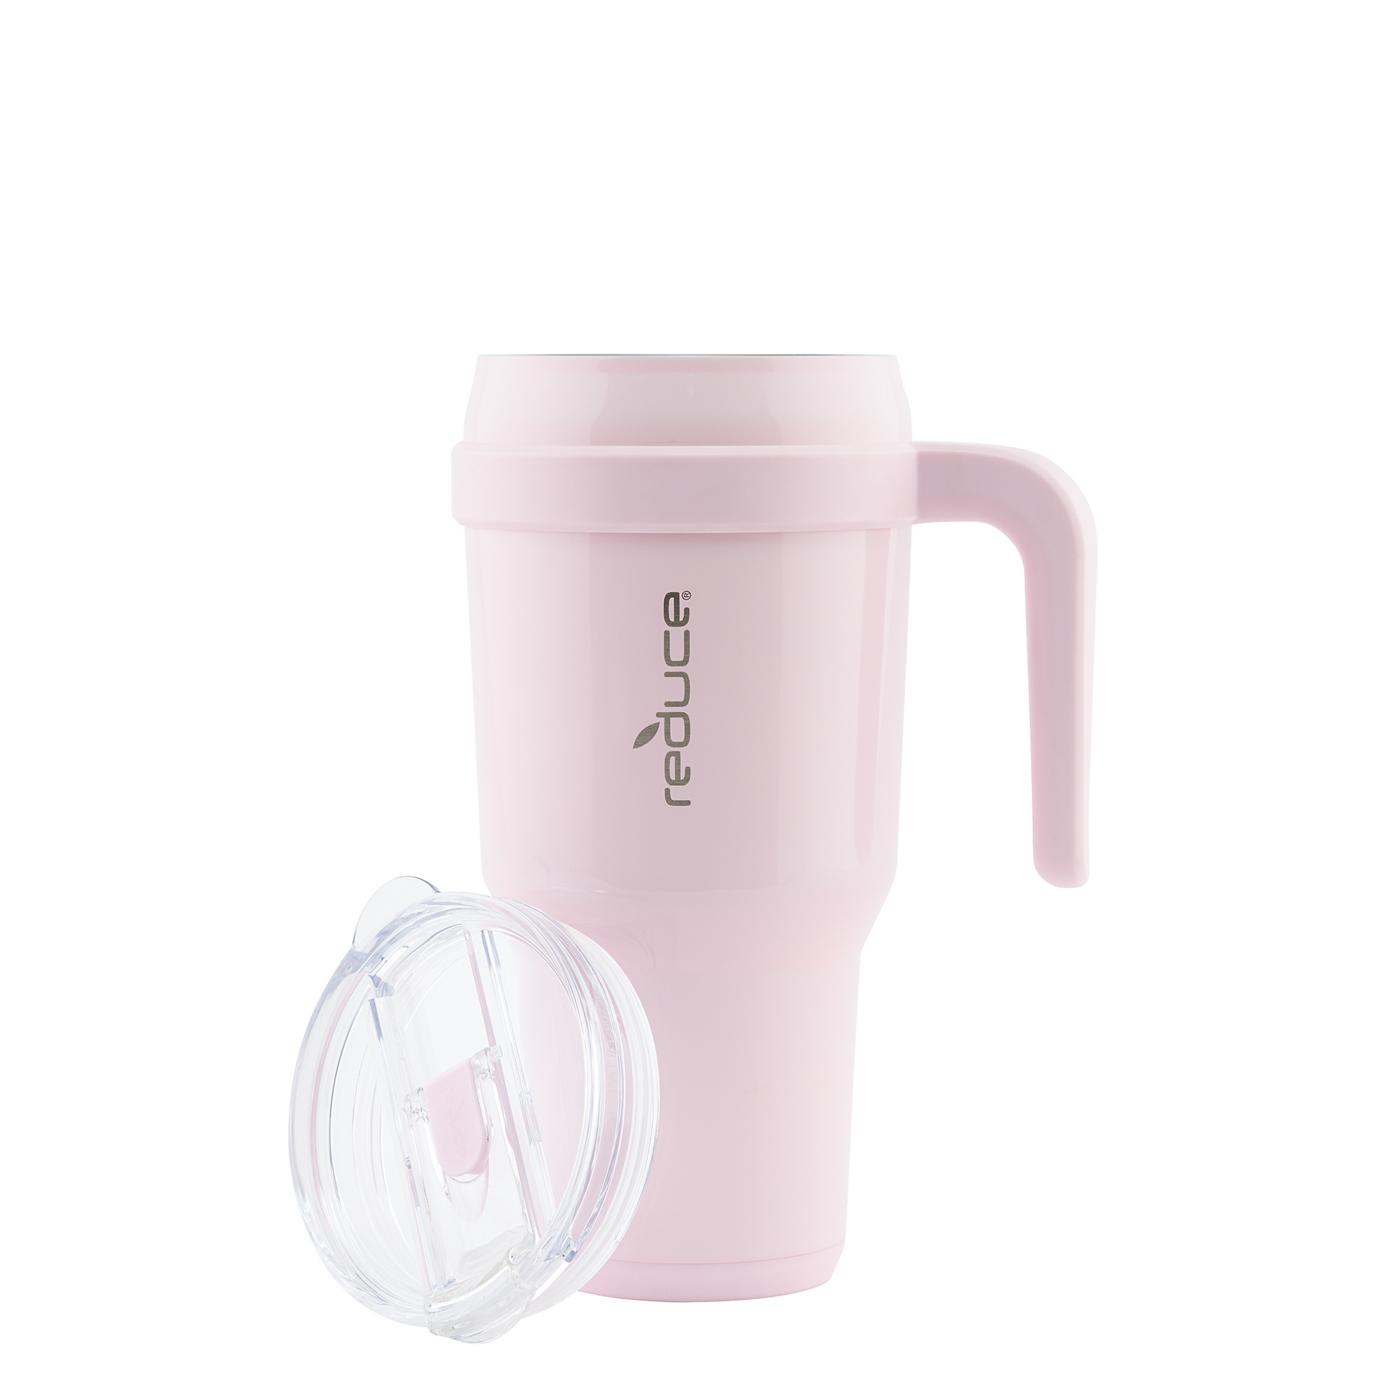 Reduce Cold One Tumbler with Handle - Pink Quartz - Shop Cups